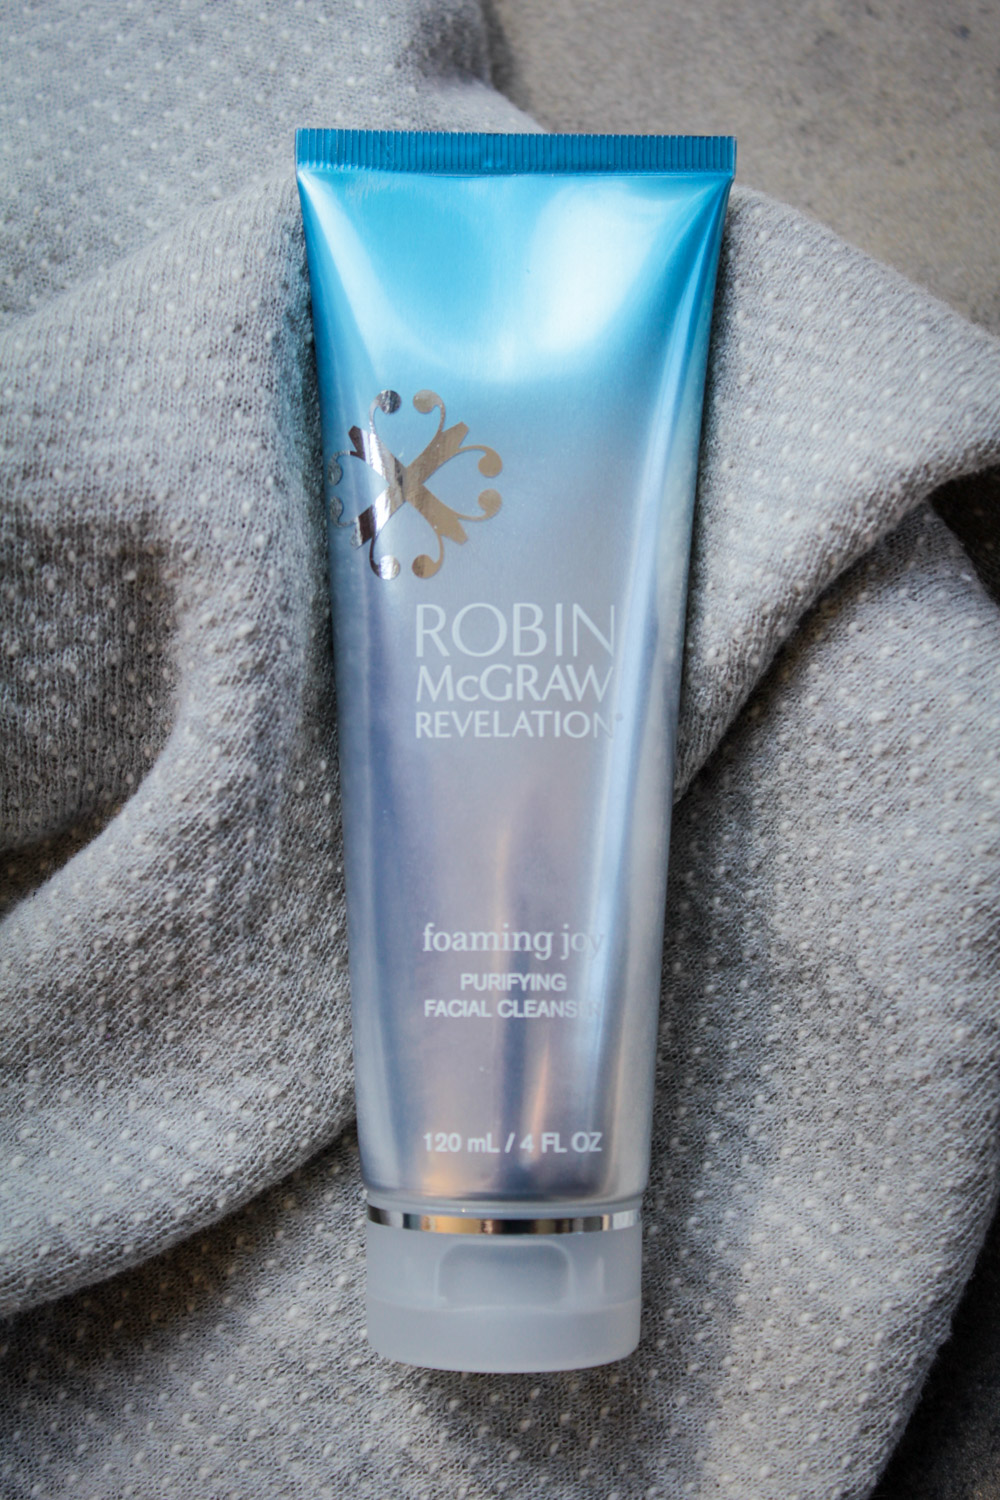 Foaming Joy! – Purifying Facial Cleanser from Robin McGraw Revelation